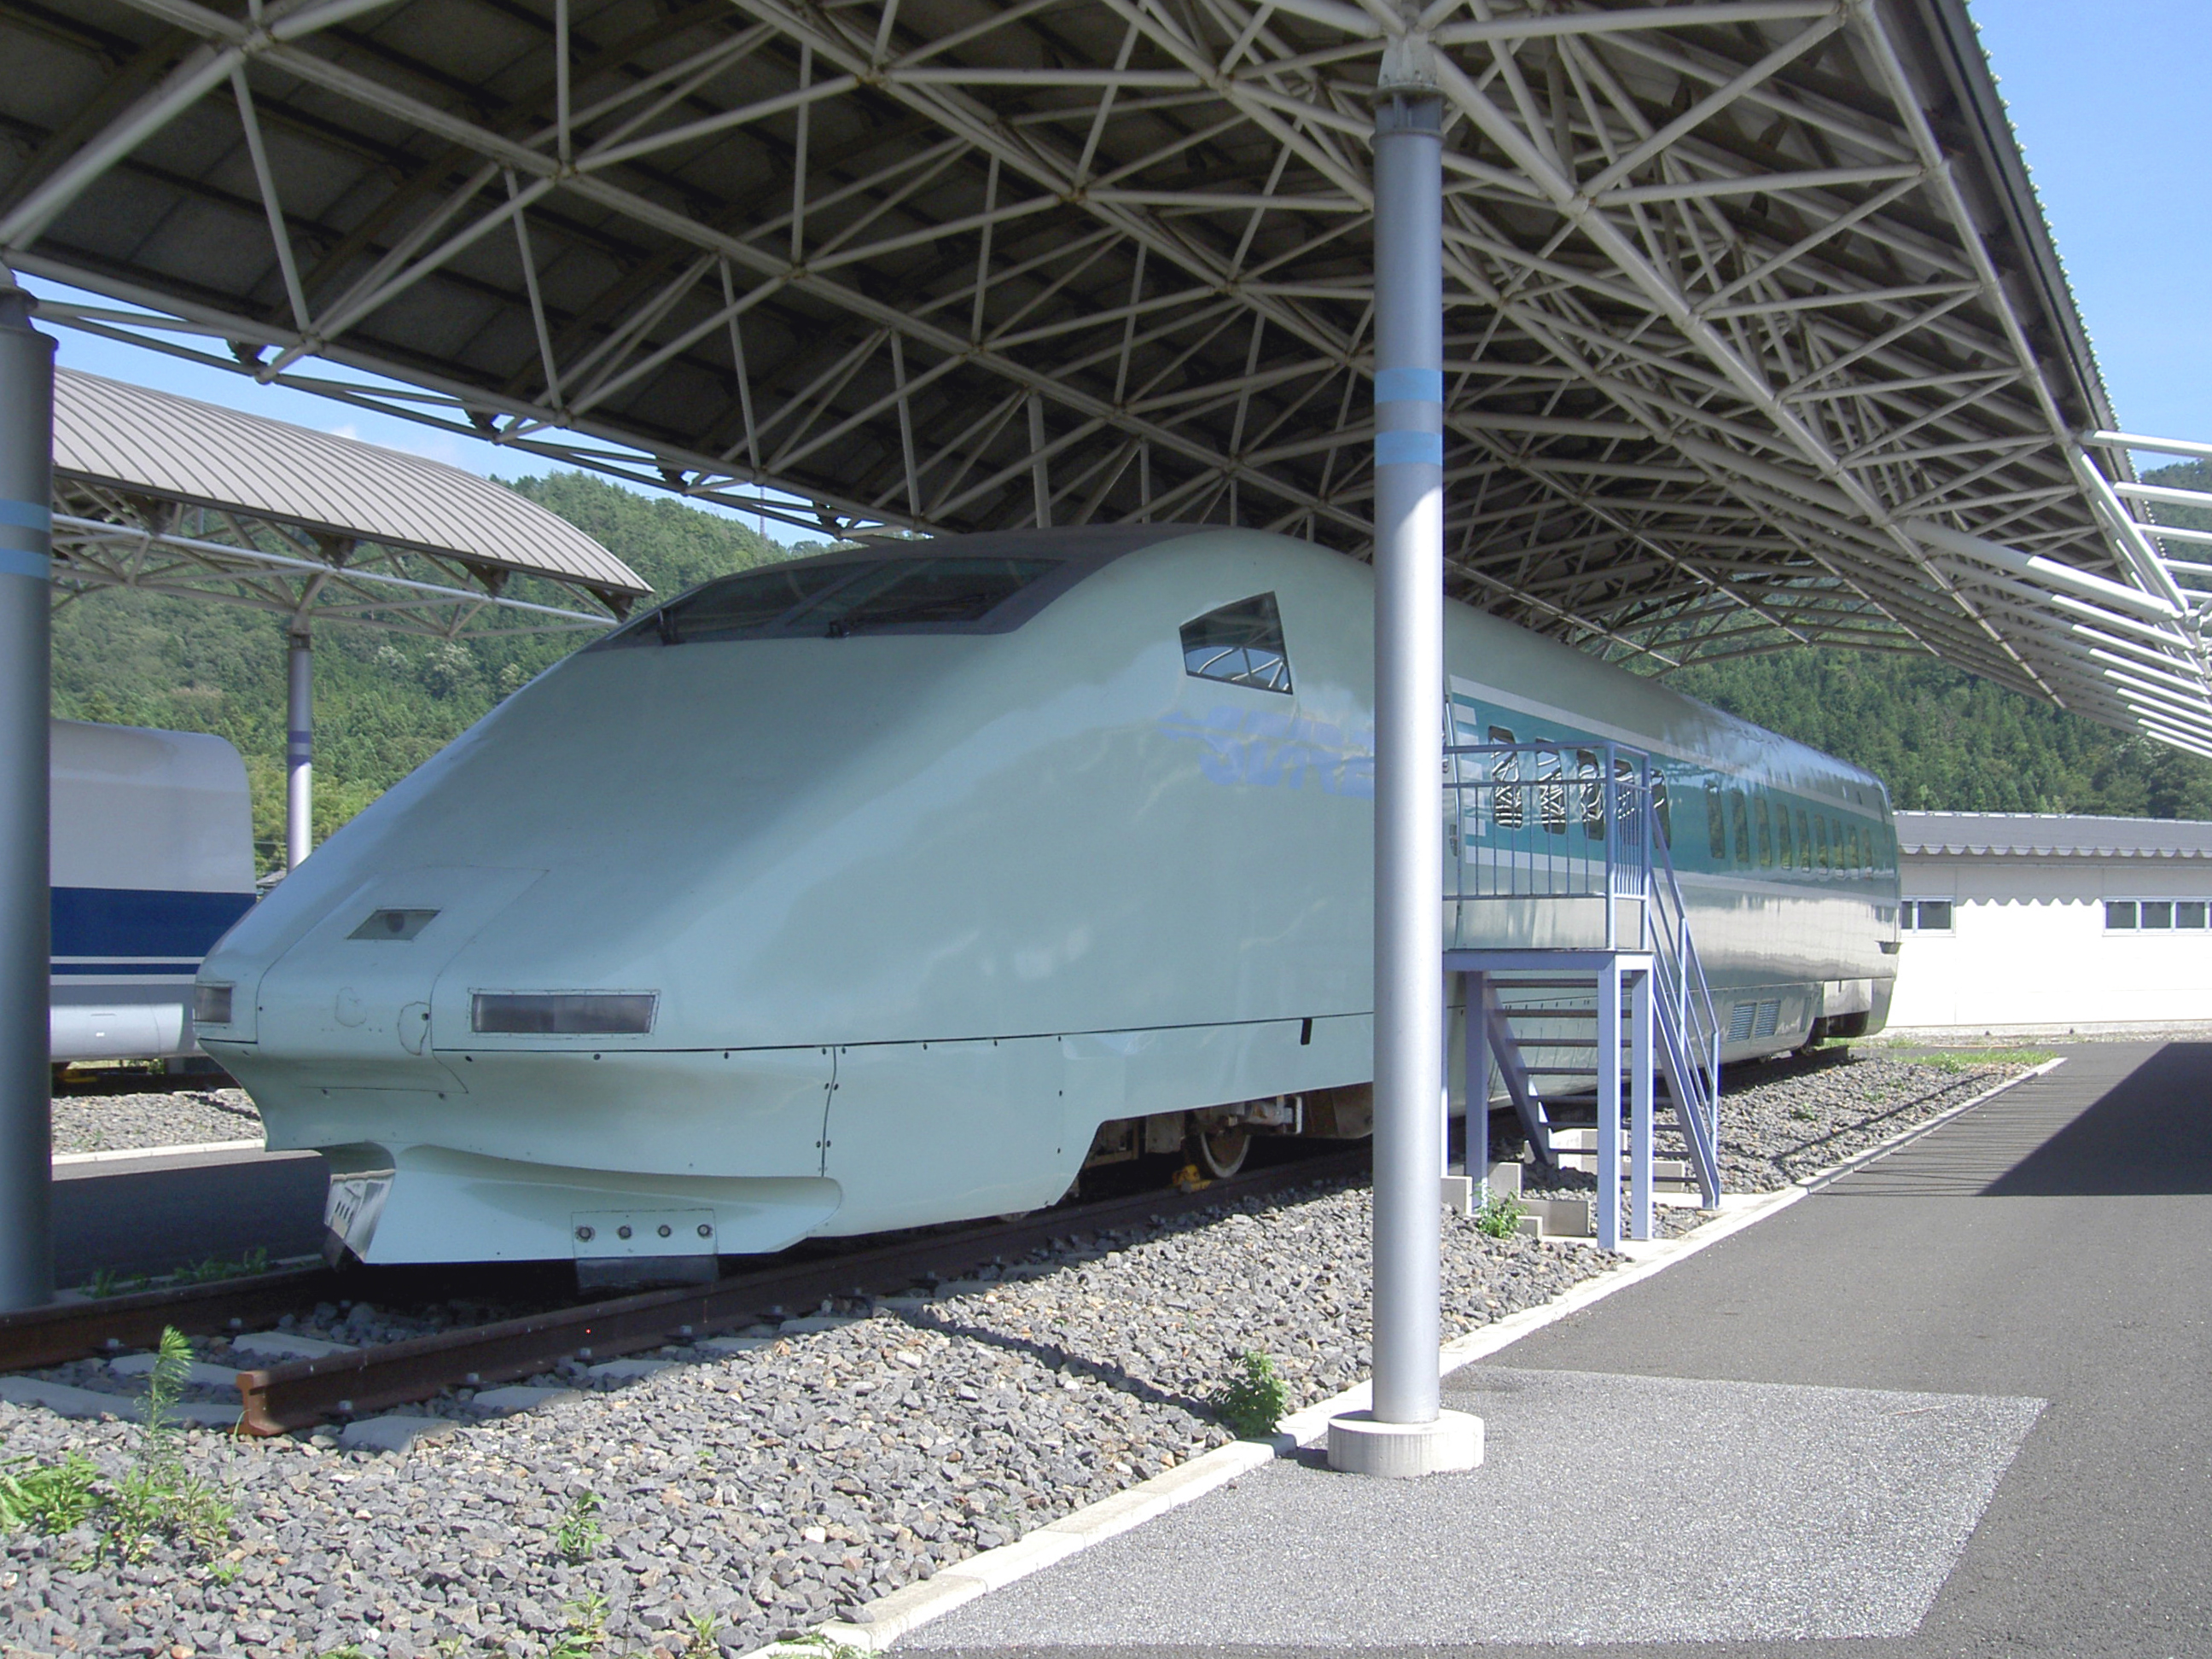 Semi-set of experimental 952 series (STAR 21) high-speed electric train at RTRI